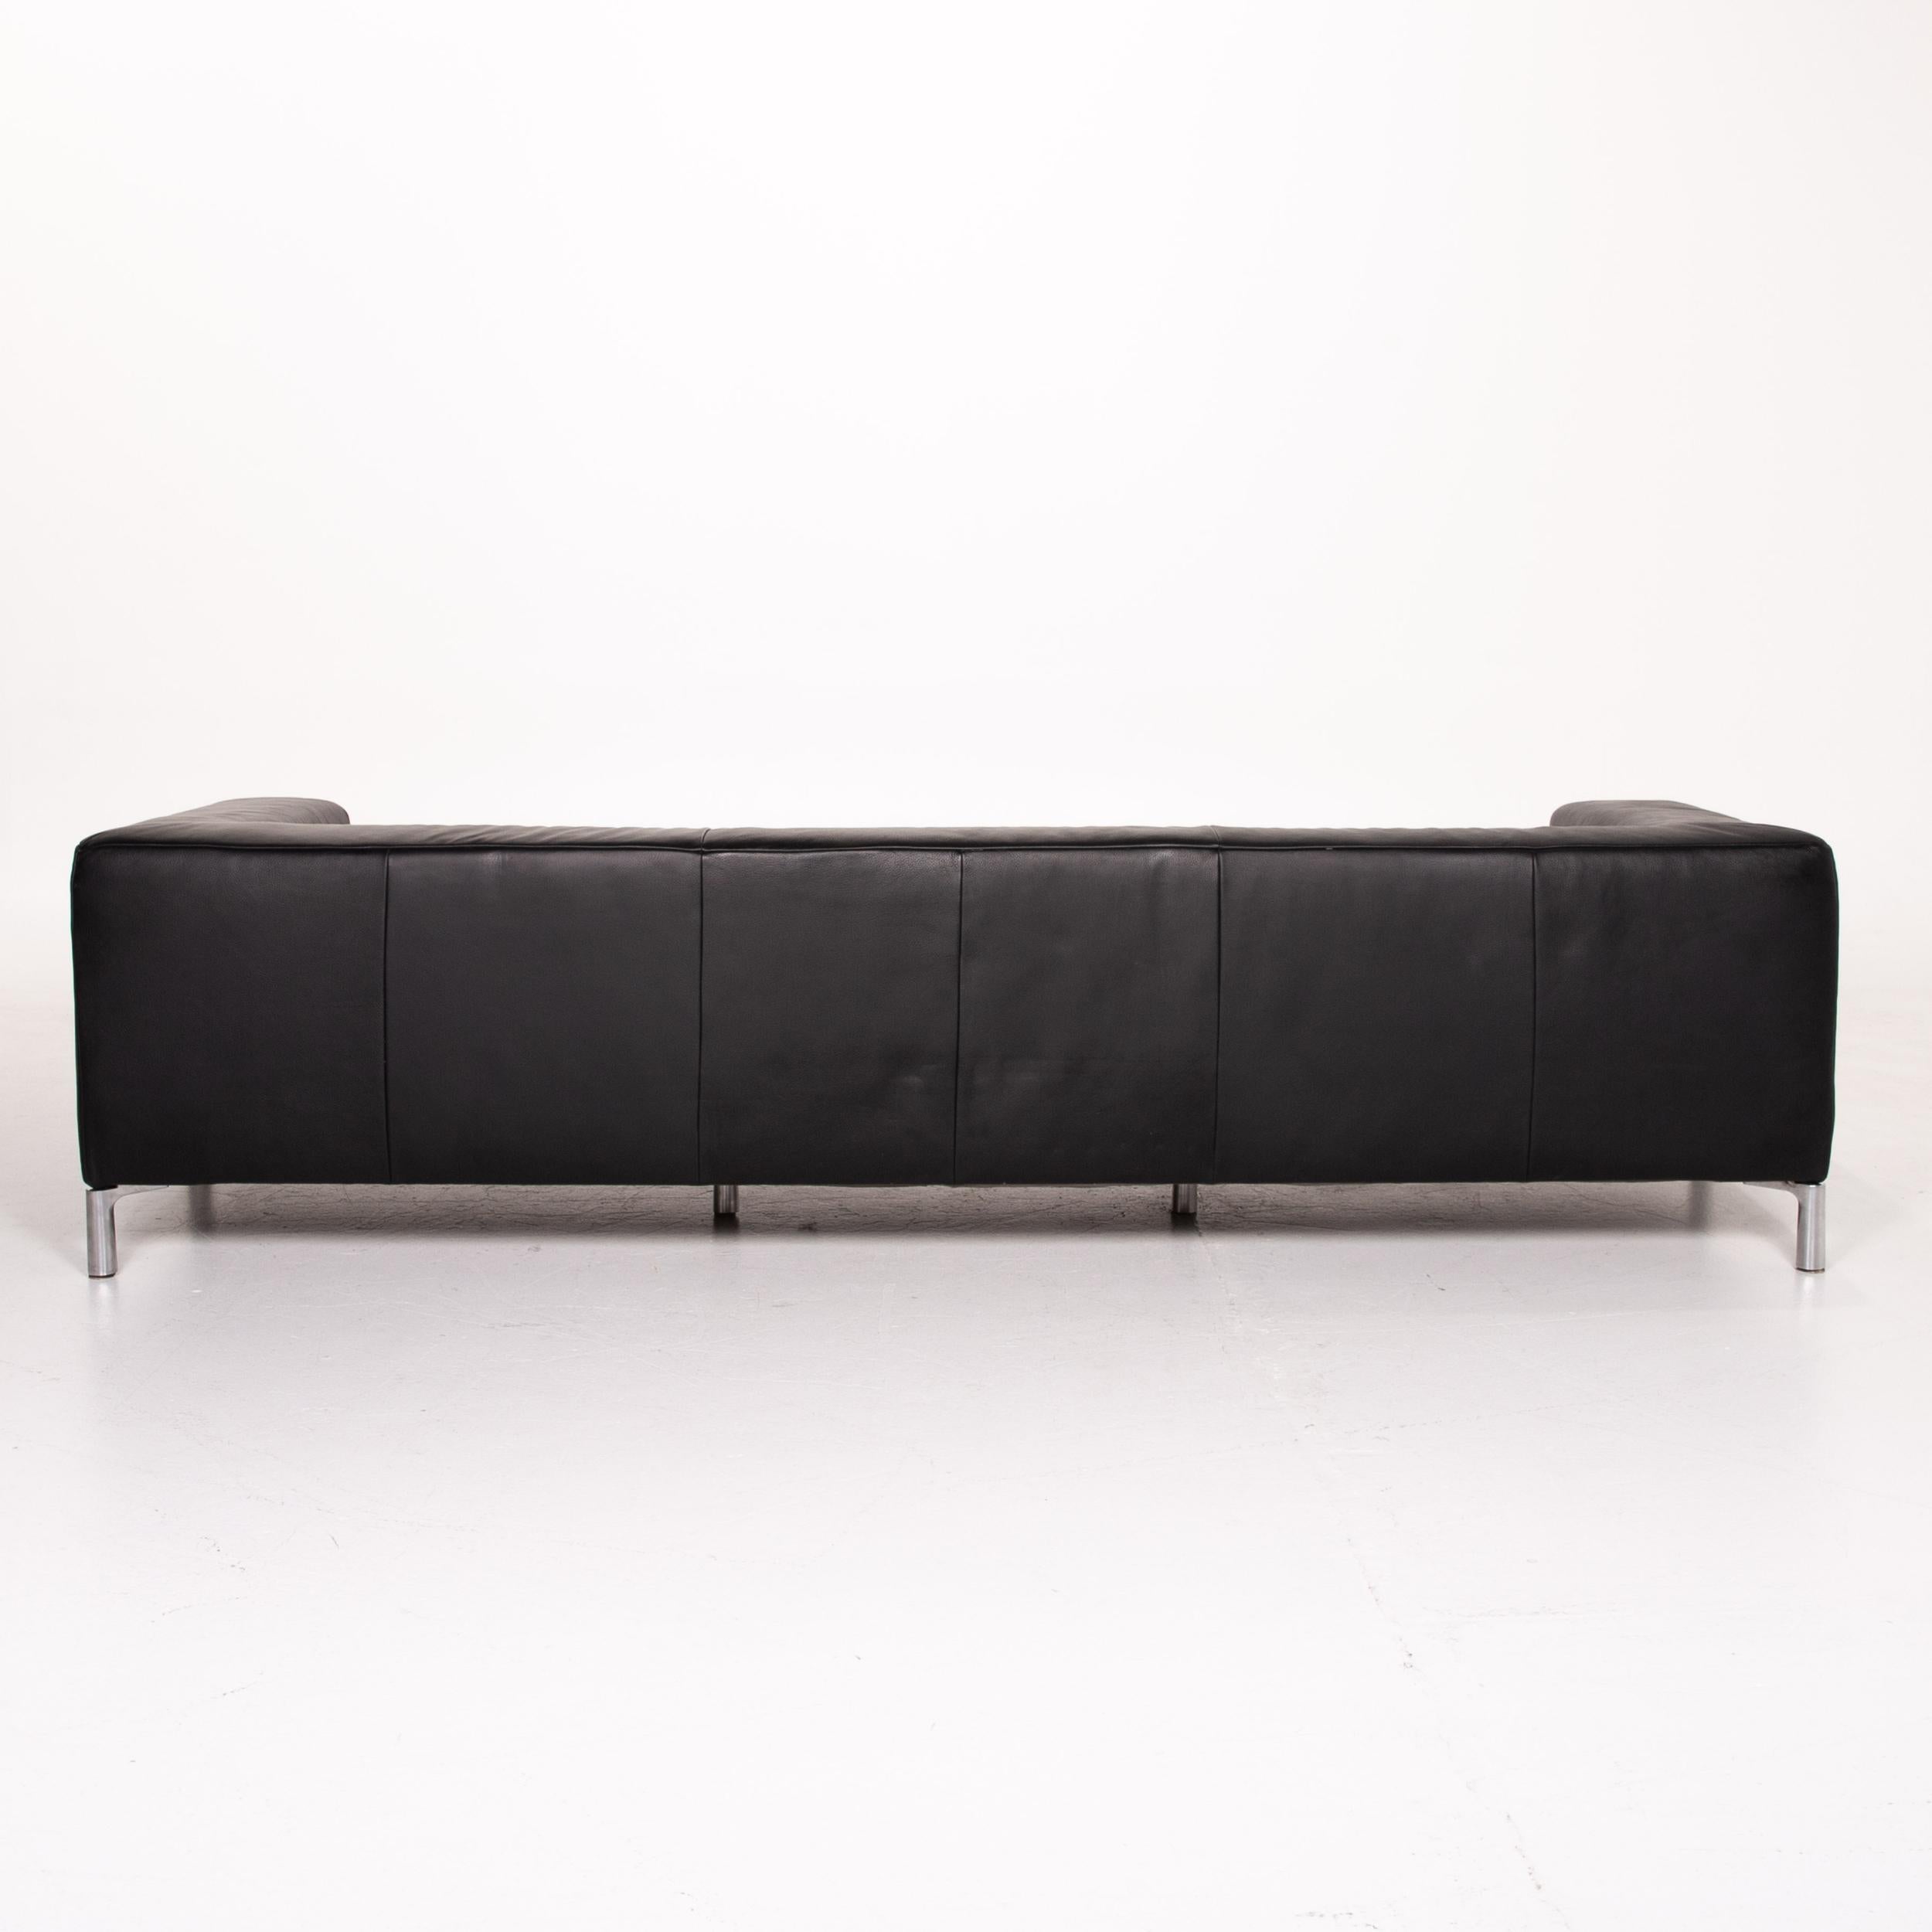 Koinor Genesis Leather Sofa Black Four-Seat Couch For Sale 2